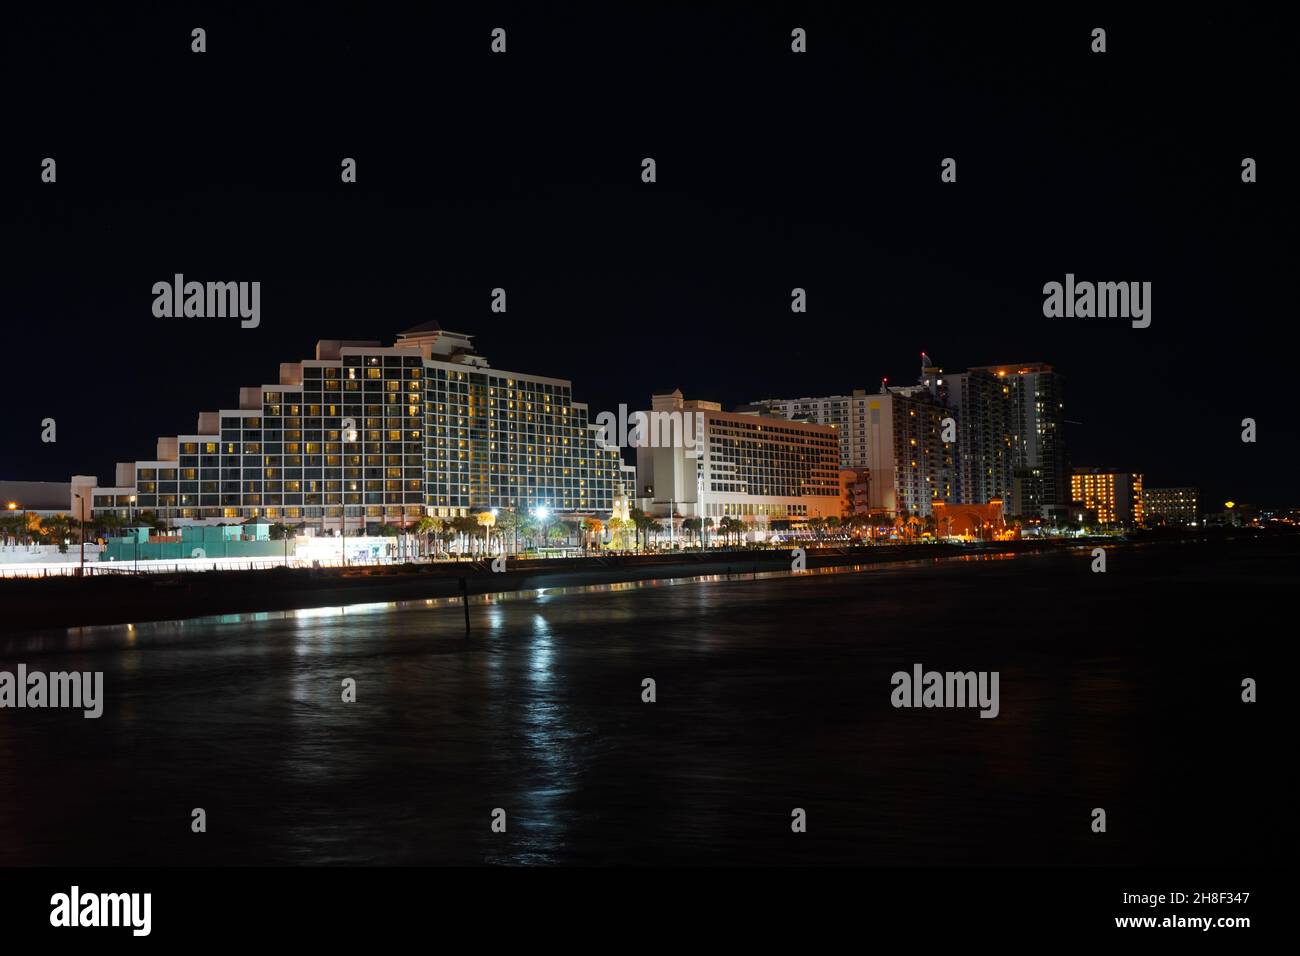 Night skyline of Daytona Beach, Florida, photographed from the fishing pier. Long exposure showing hotels, beach and waves. Stock Photo